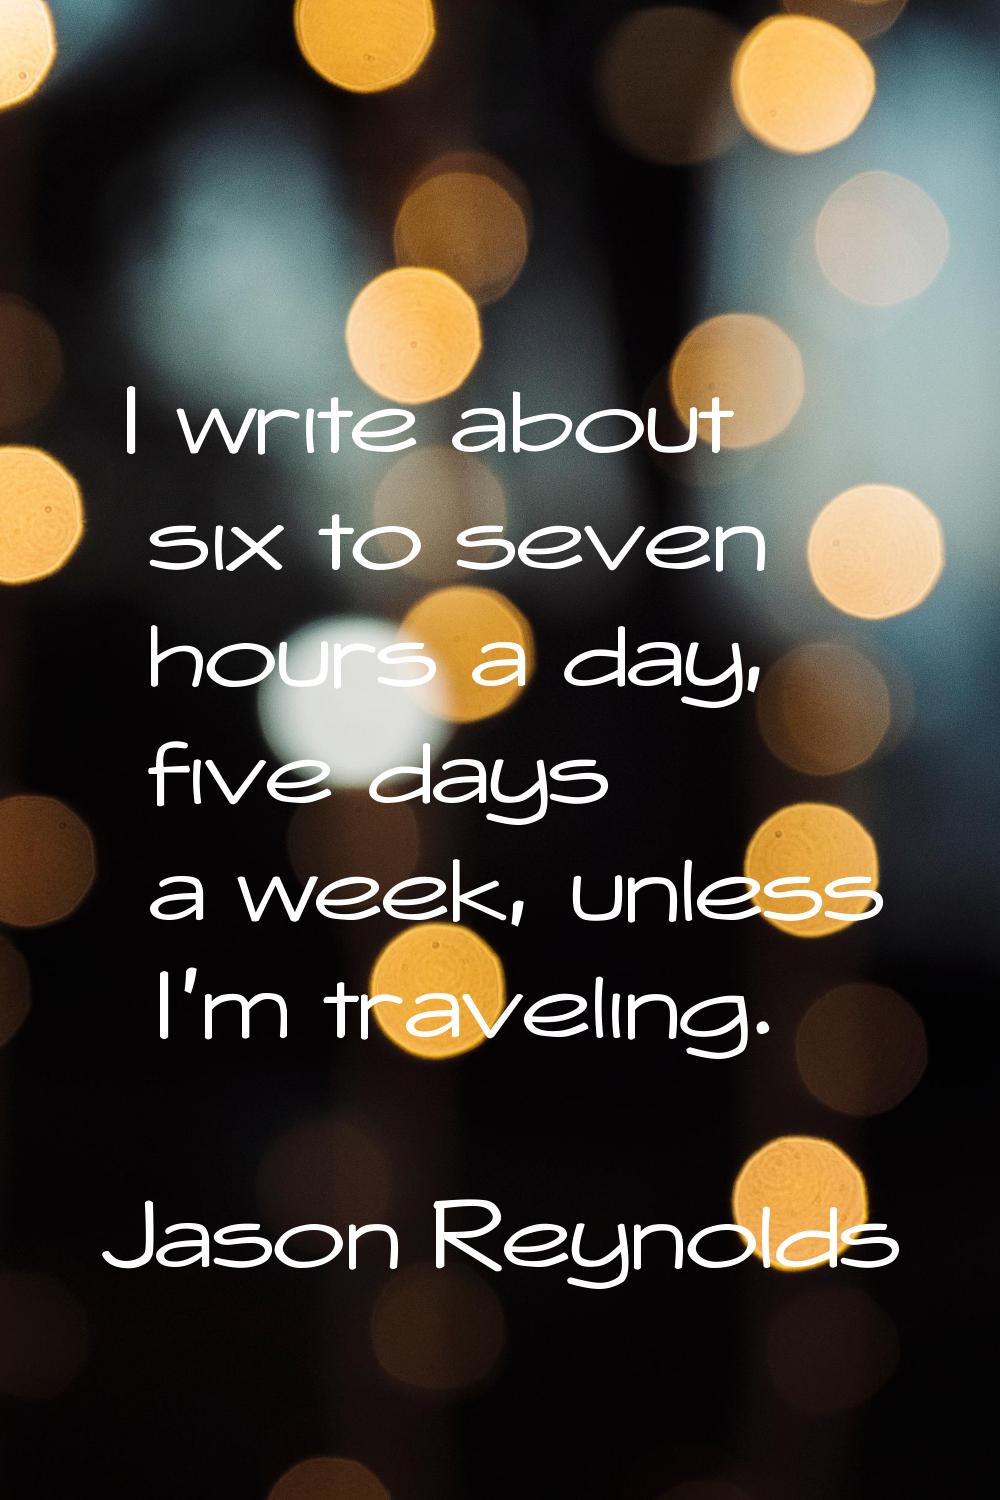 I write about six to seven hours a day, five days a week, unless I'm traveling.